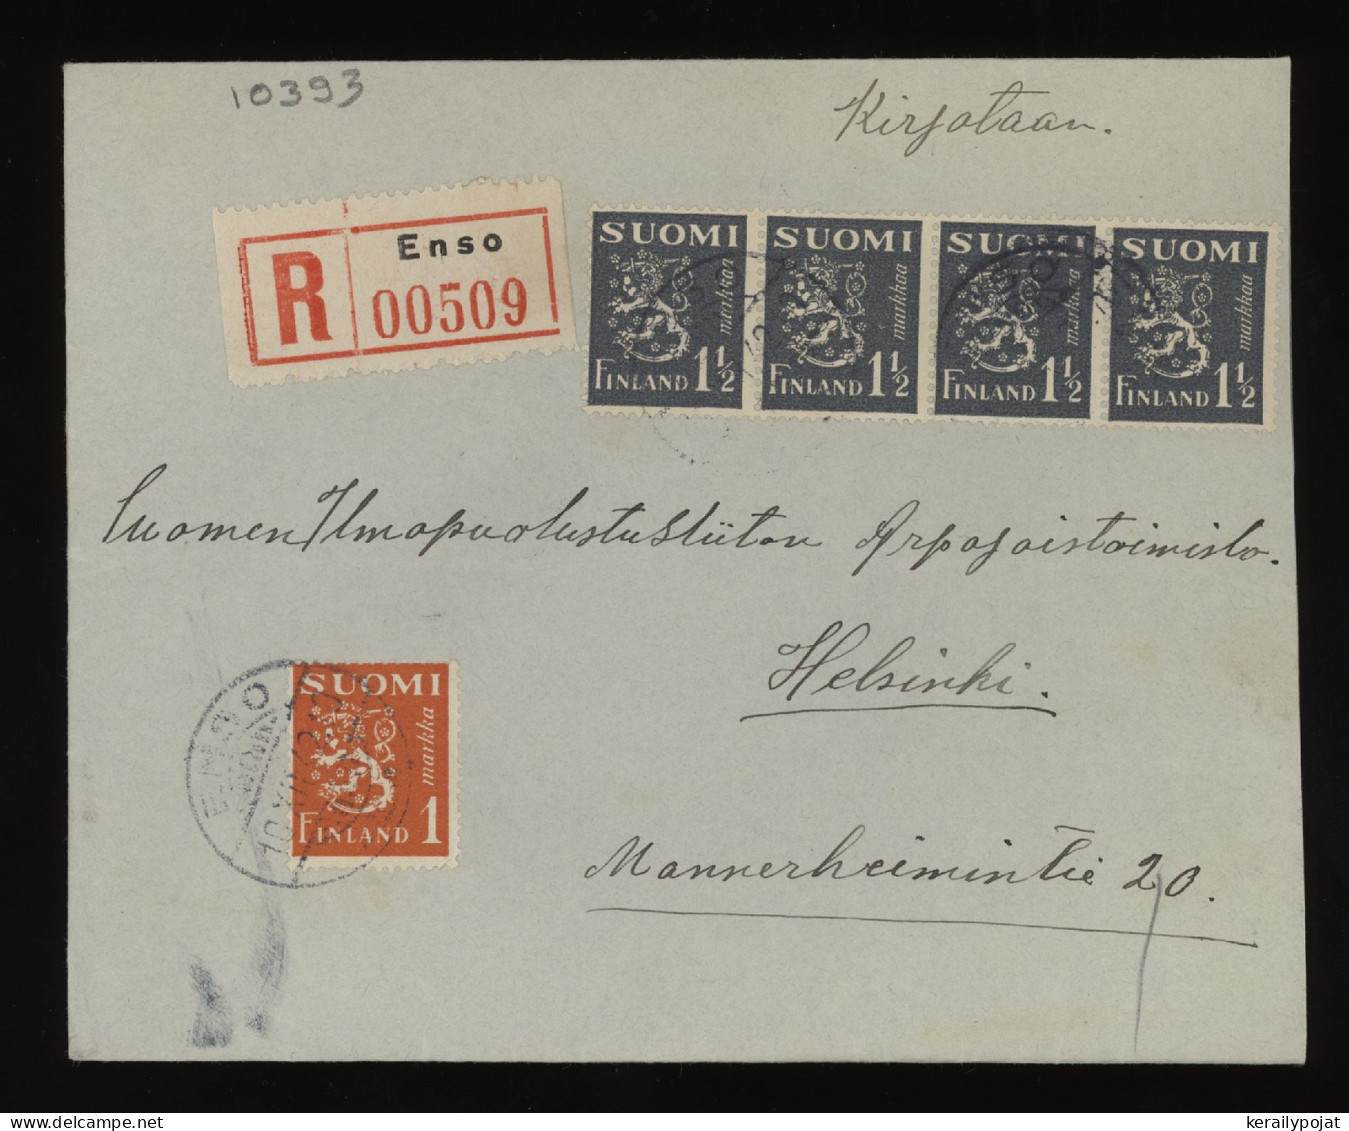 Finland 1942 Enso Registered Cover__(10393) - Covers & Documents